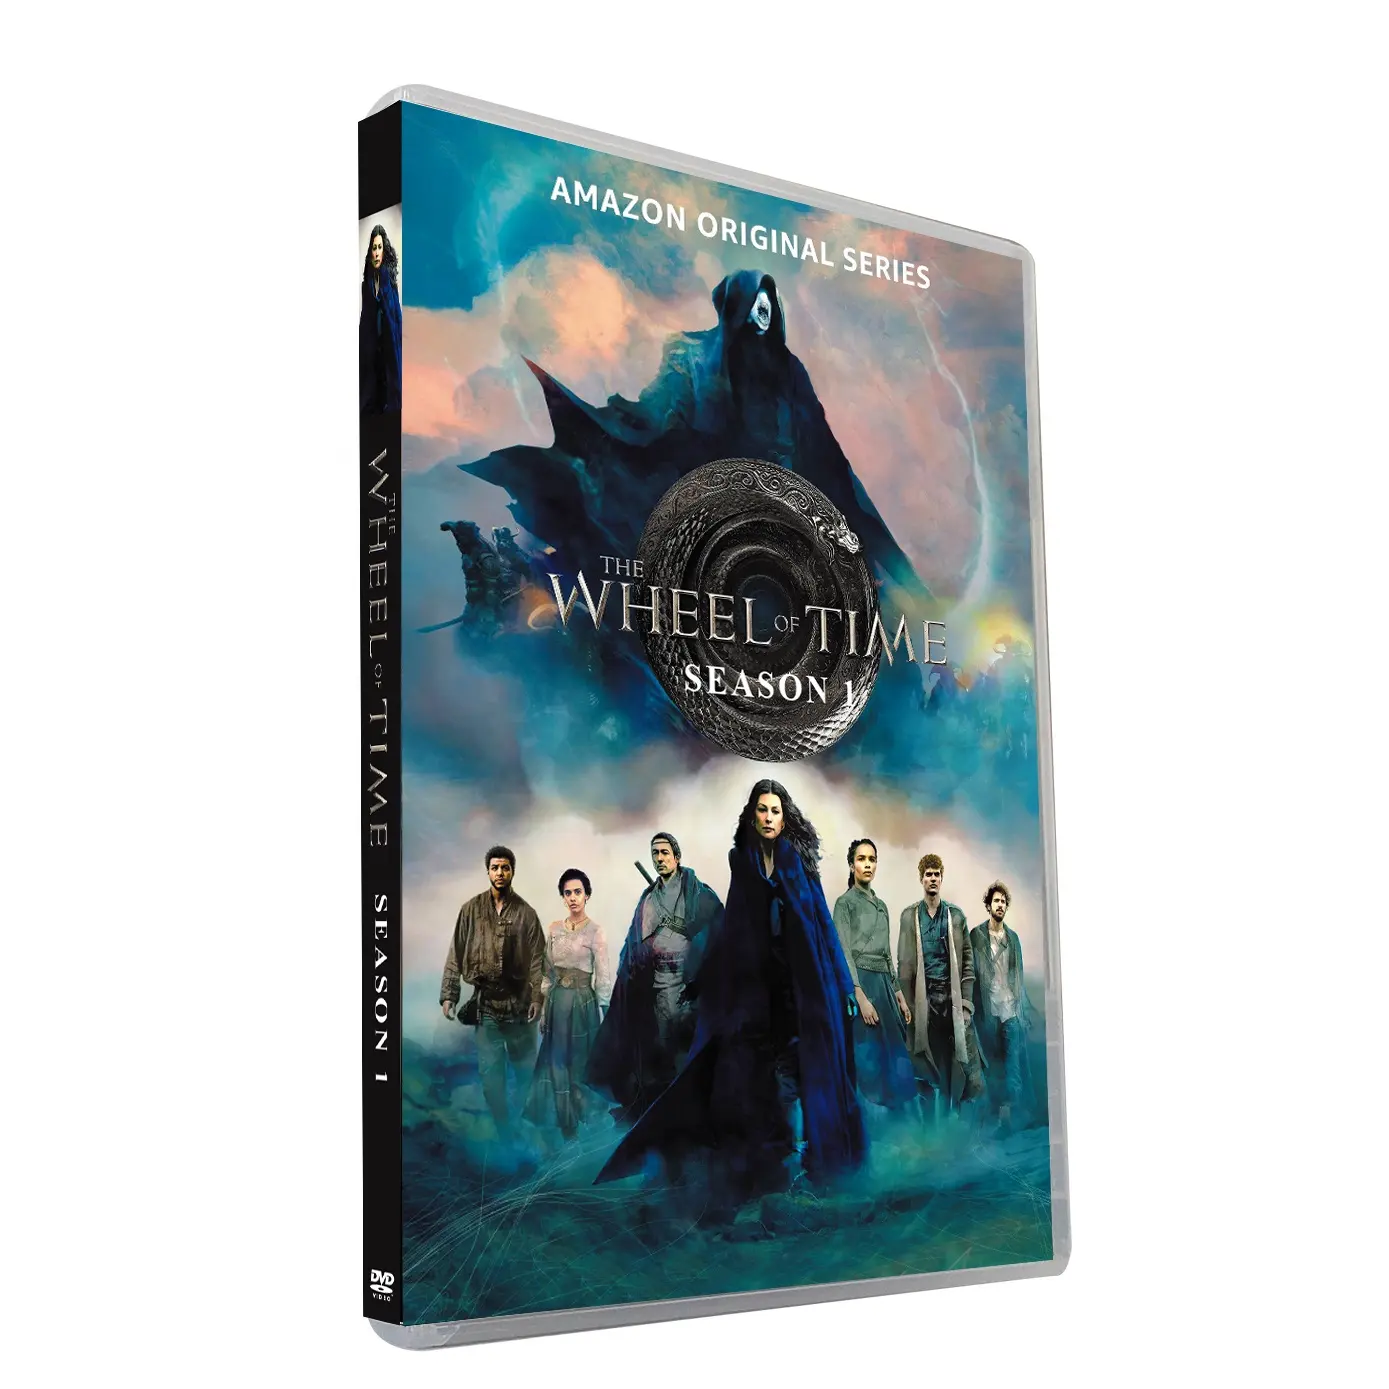 series DVD BOXED SETS MOVIES TV show Films ebay factory supply New Releases disc ddp shipping The Wheel of Time Season 1 3DVD